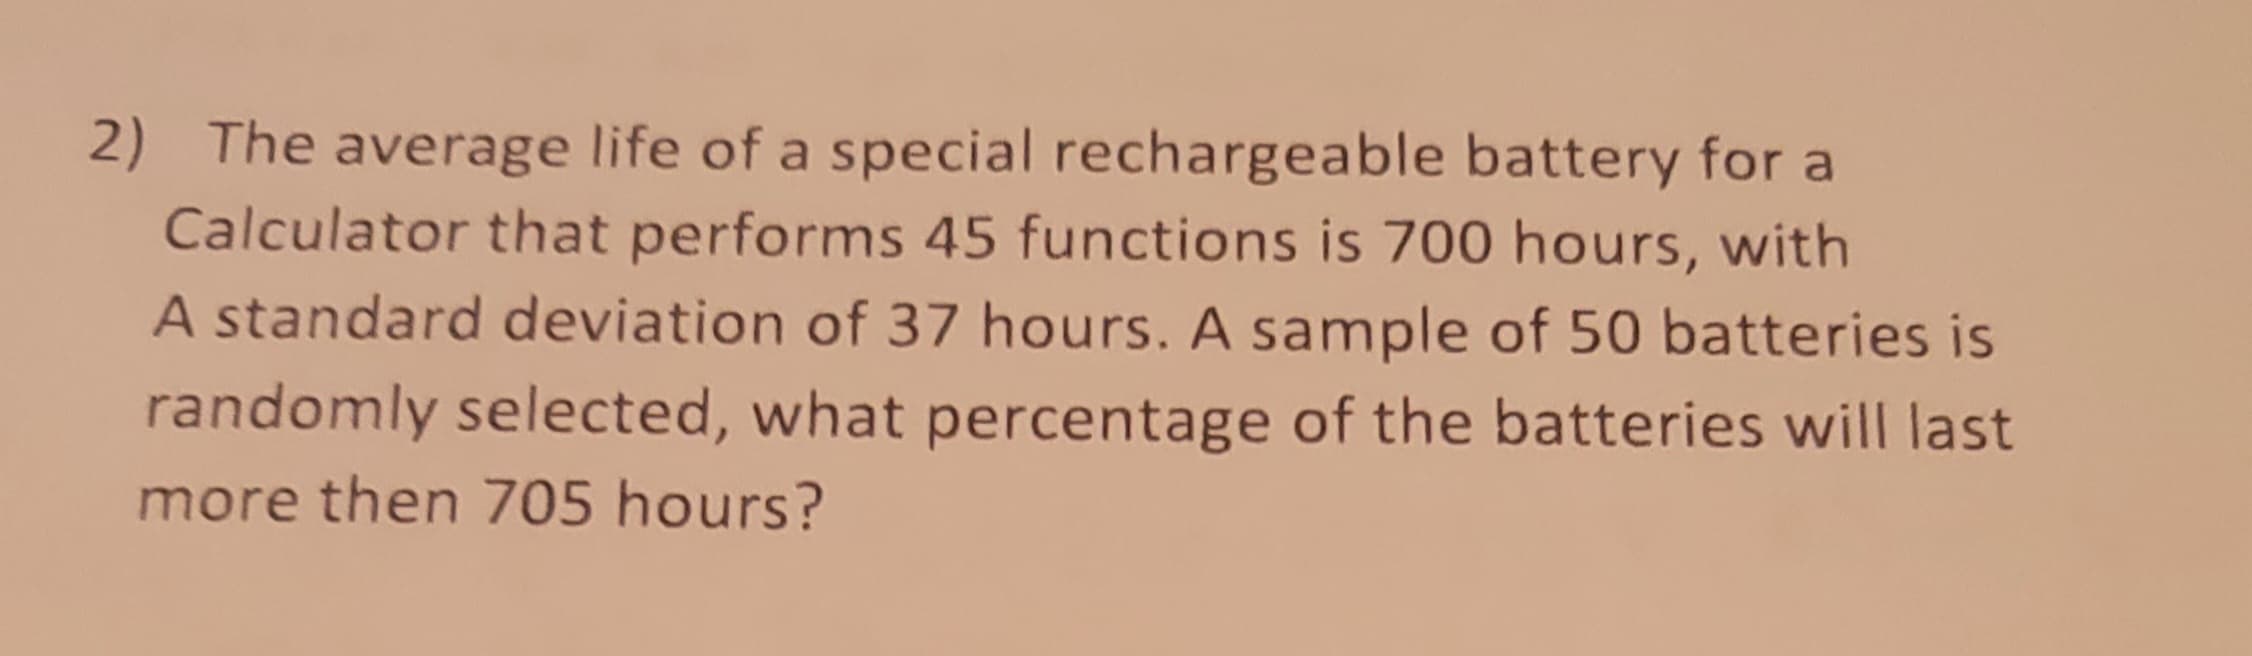 2) The average life of a special rechargeable battery for a
Calculator that performs 45 functions is 700 hours, with
A standard deviation of 37 hours. A sample of 50 batteries is
randomly selected, what percentage of the batteries will last
more then 705 hours?